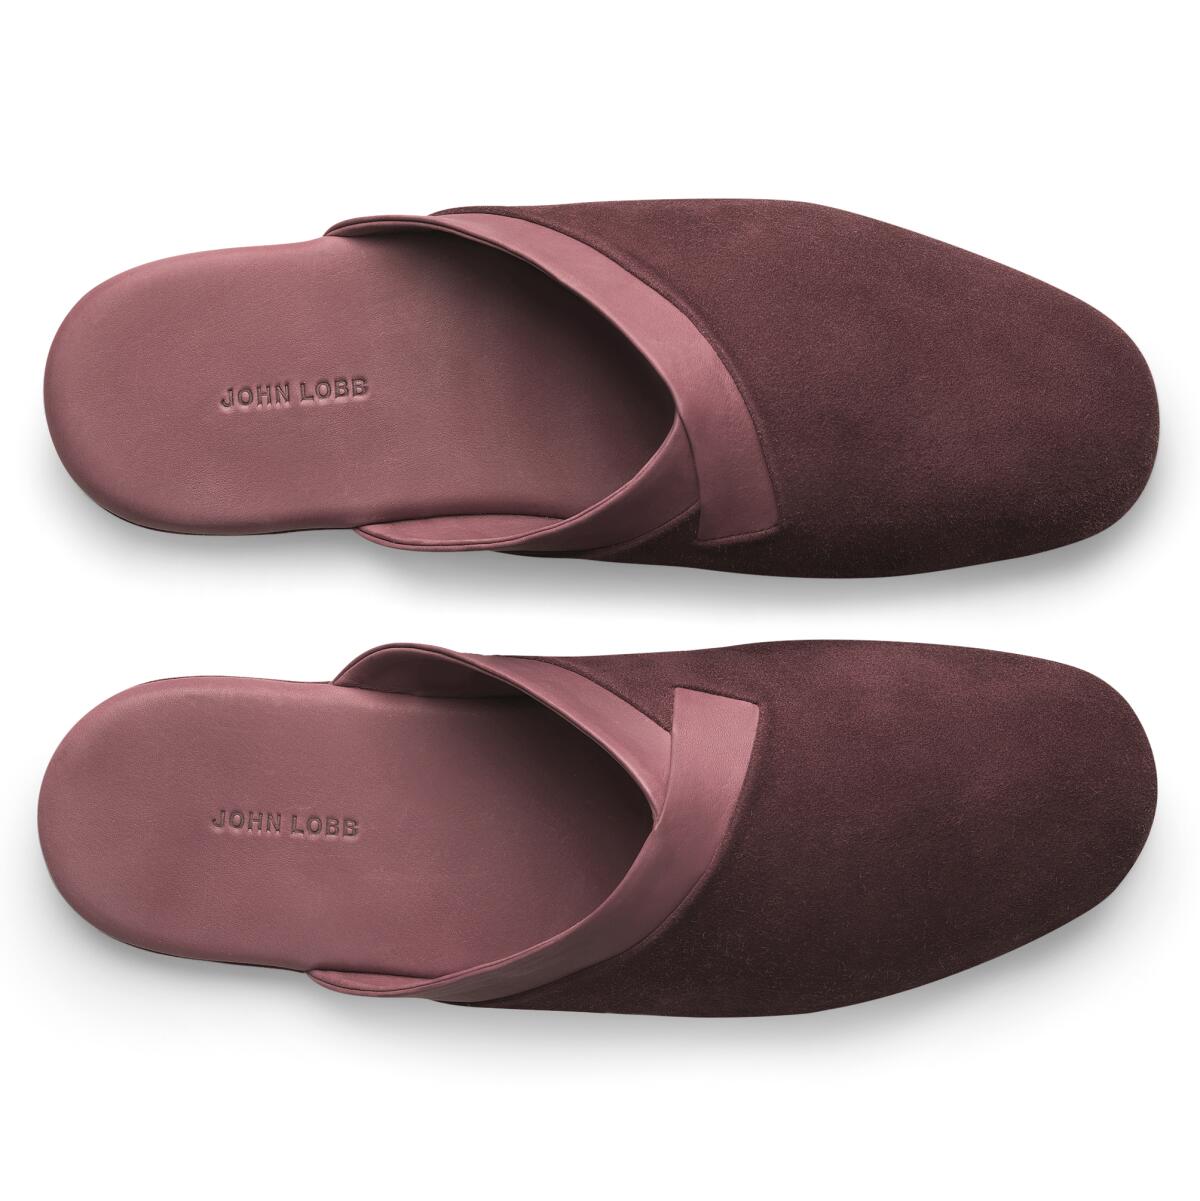 A photo of John Lobb's Knighton slippers in burgundy cashmere suede.